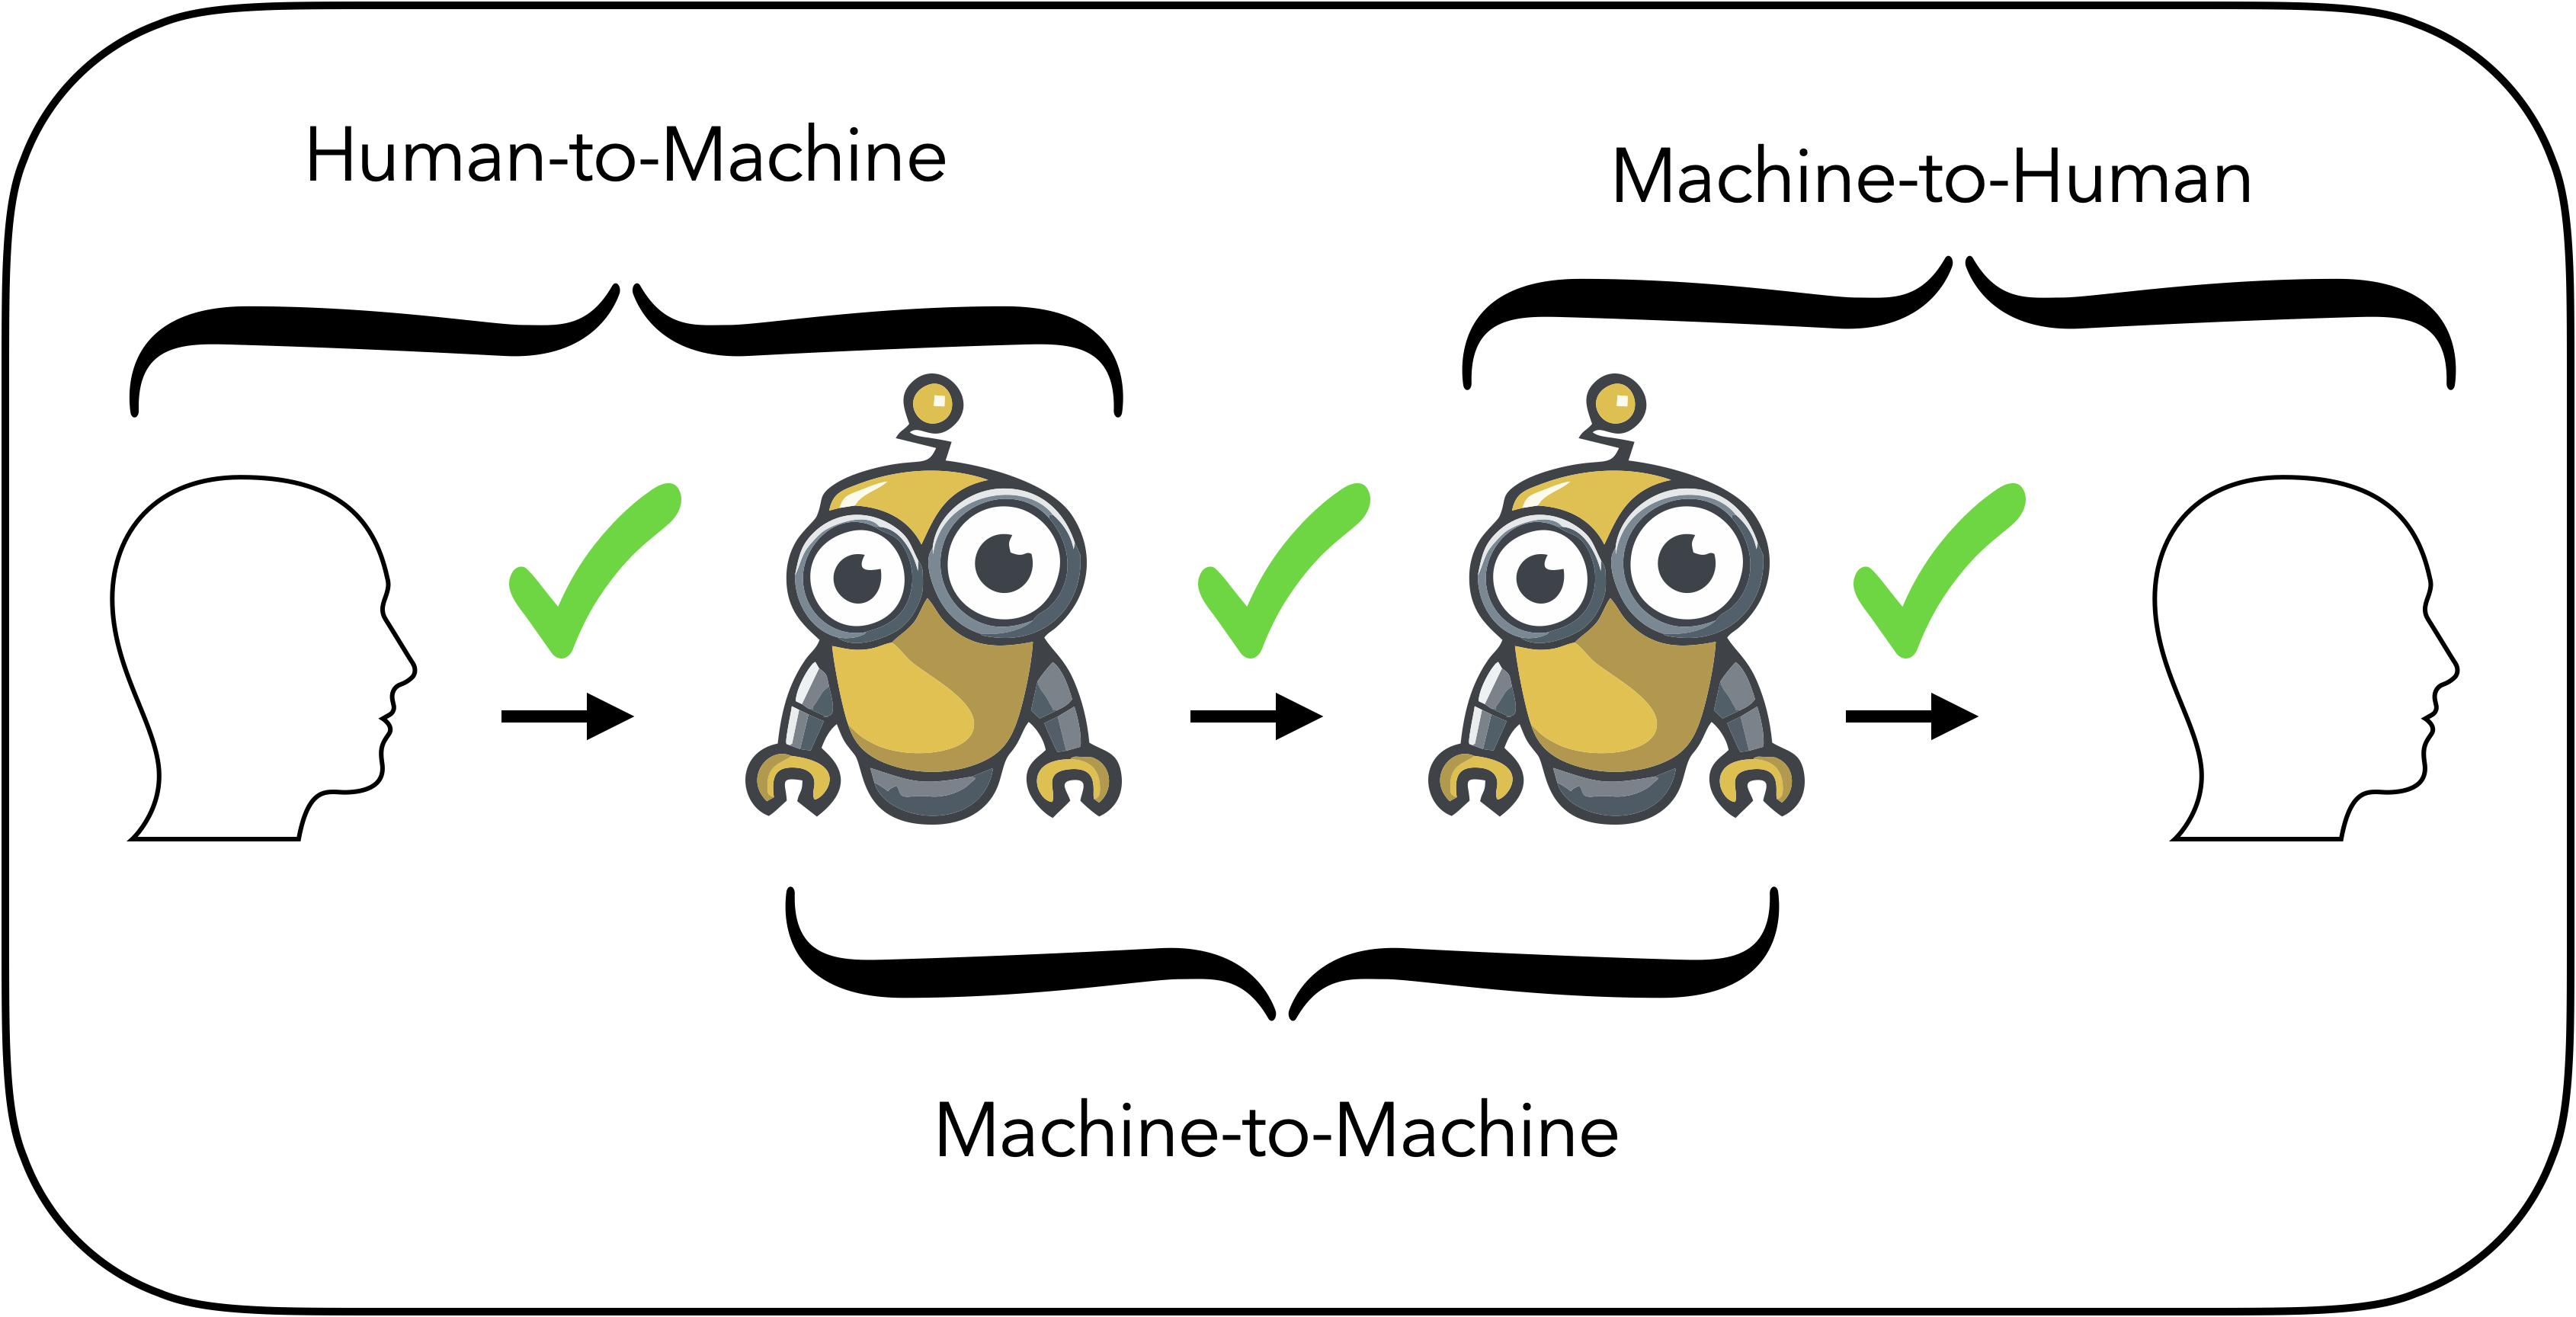 A diagram detailing different communicative contexts: humans speaking to machines, machines speaking to each other, and machines speaking to humans. In current times we expect all of these interactions to be commonplace and coexist with each other across many overlapping use cases.